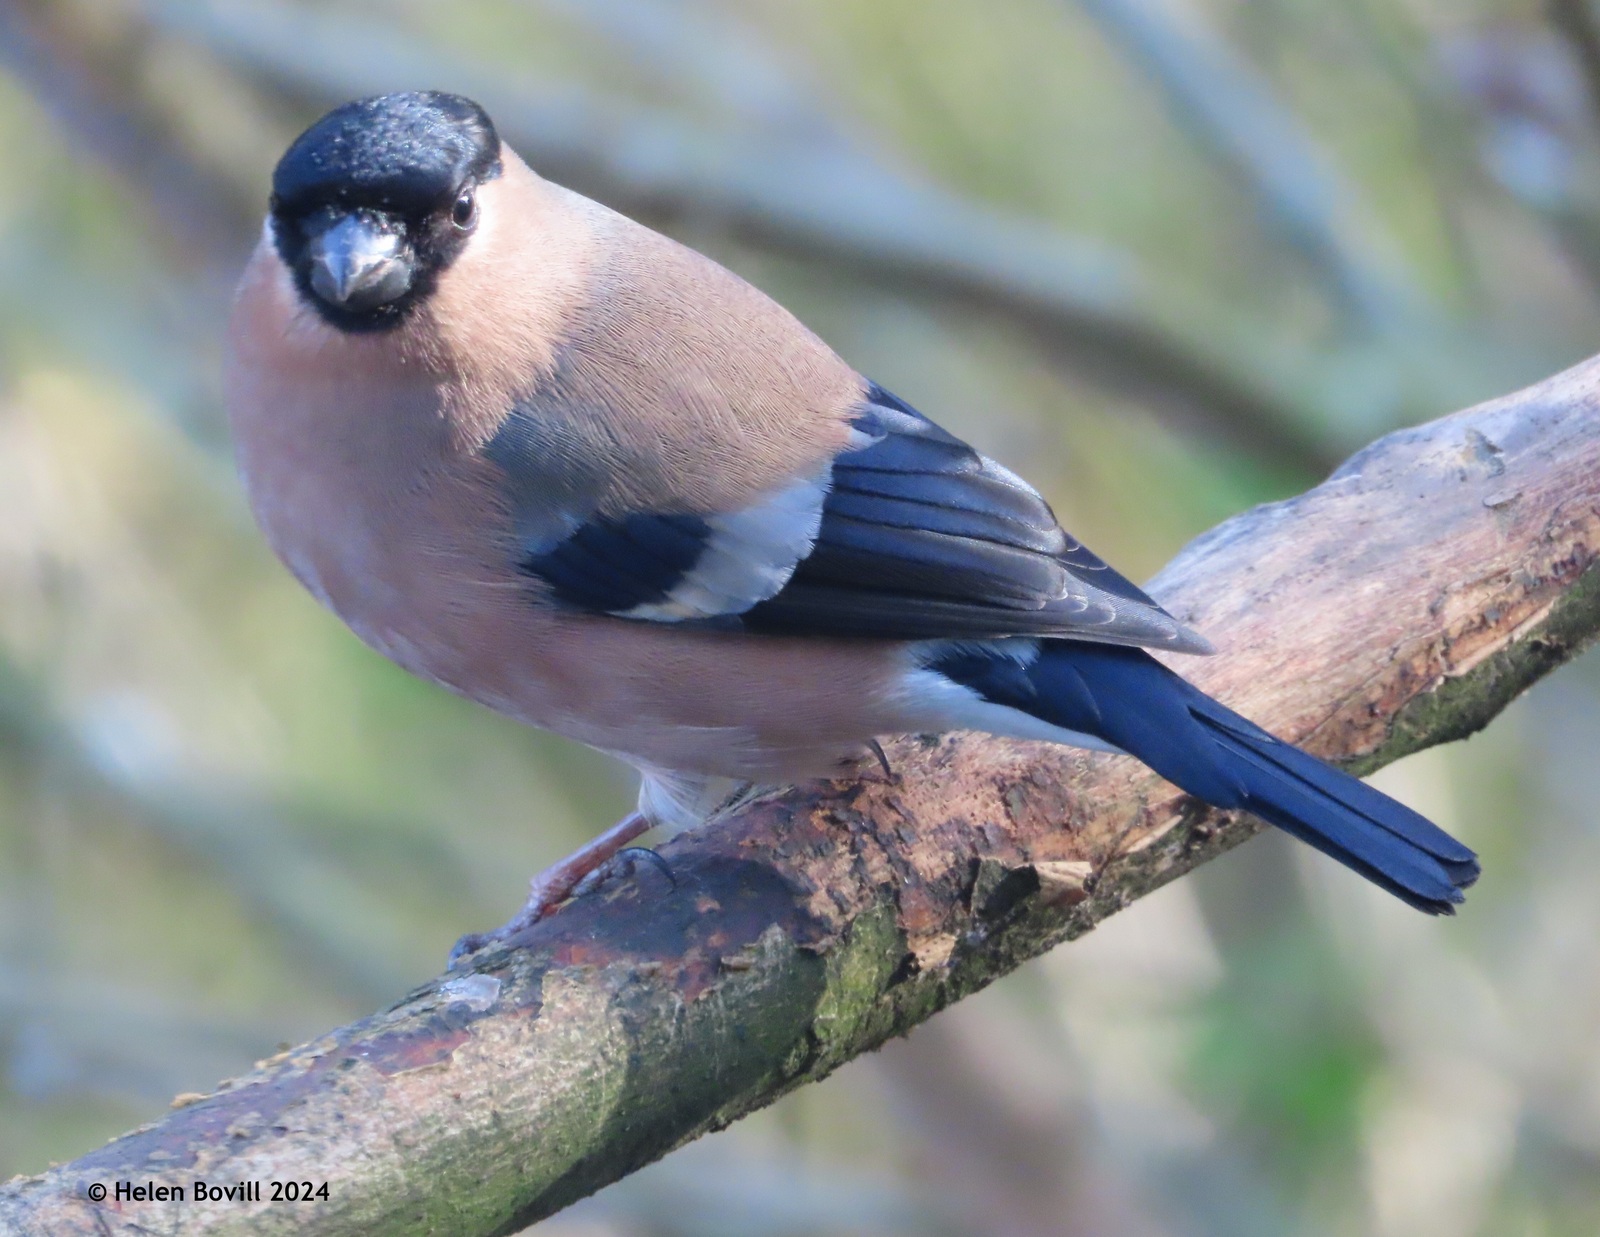 A female Bullfinch perched in a tree in the cemetery